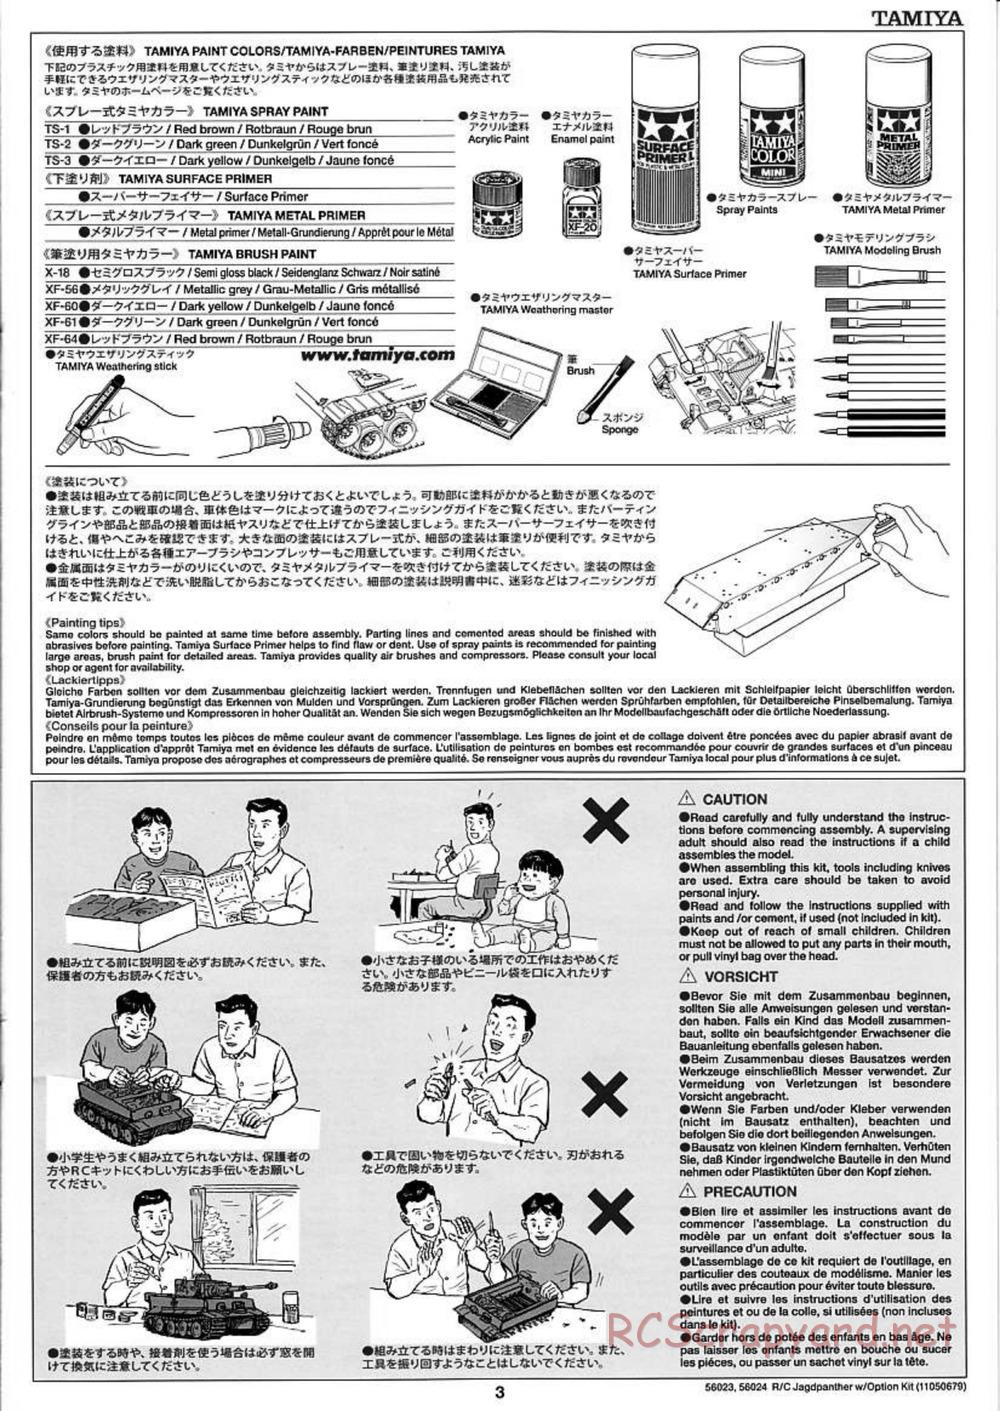 Tamiya - Jagdpanther - 1/16 Scale Chassis - Manual - Page 3